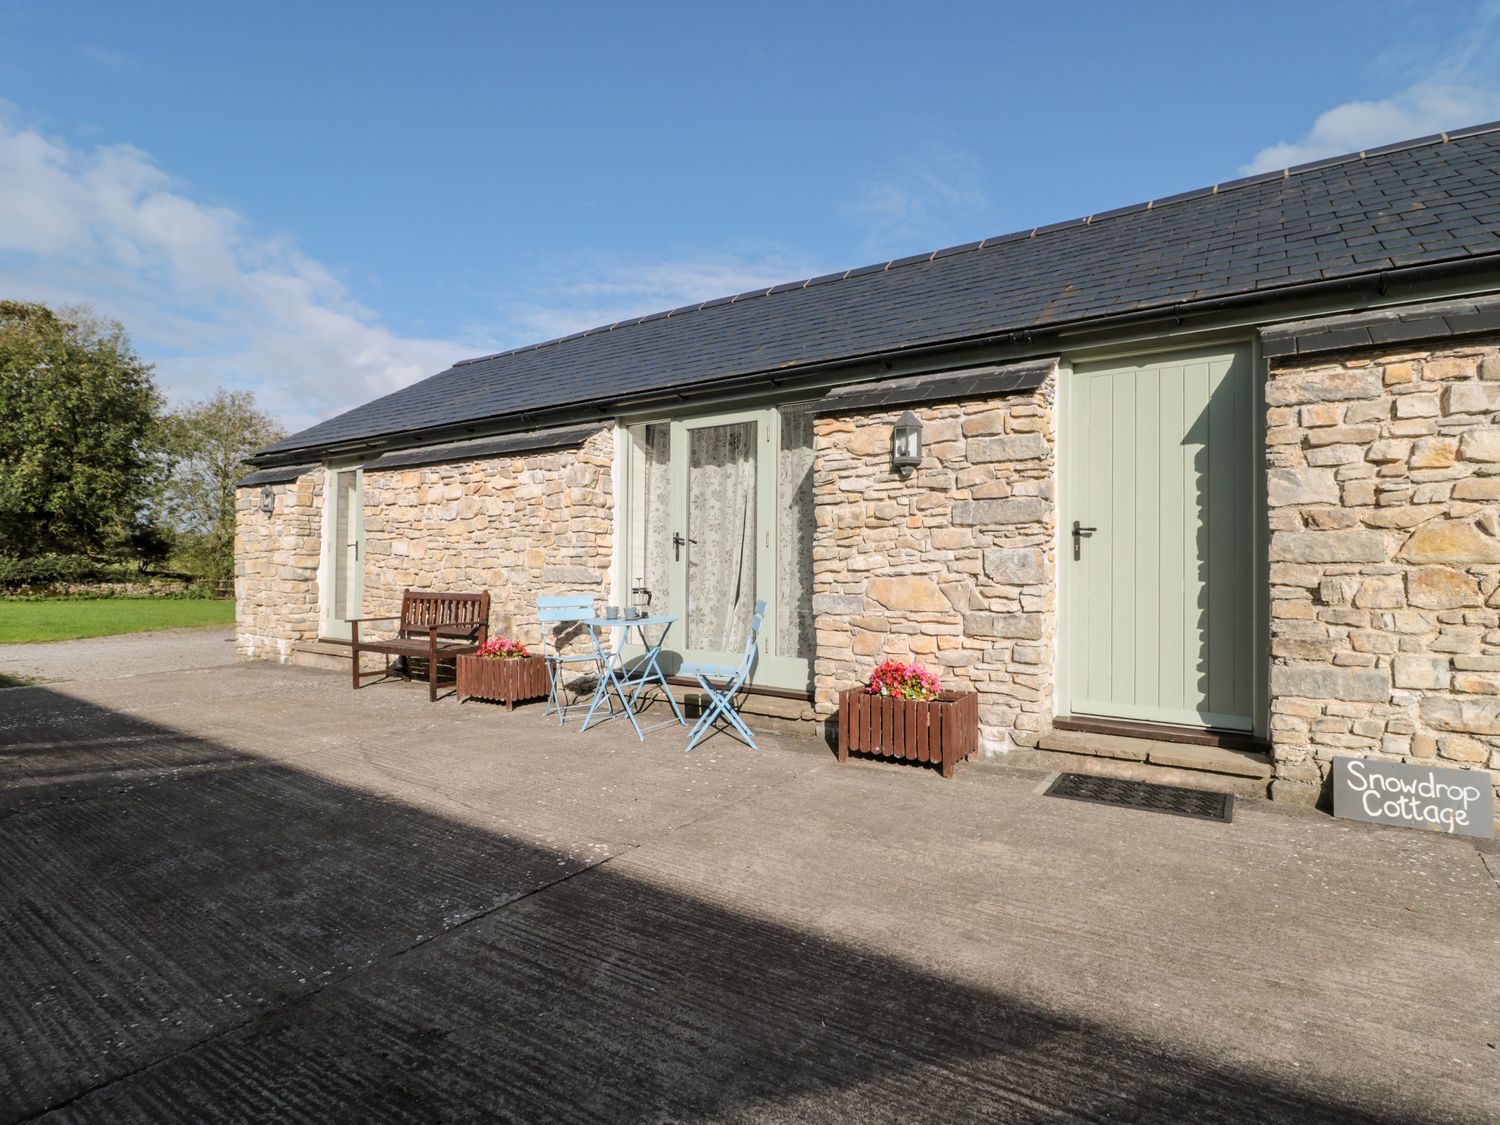 Snowdrop Cottage - South Wales - 964147 - photo 1